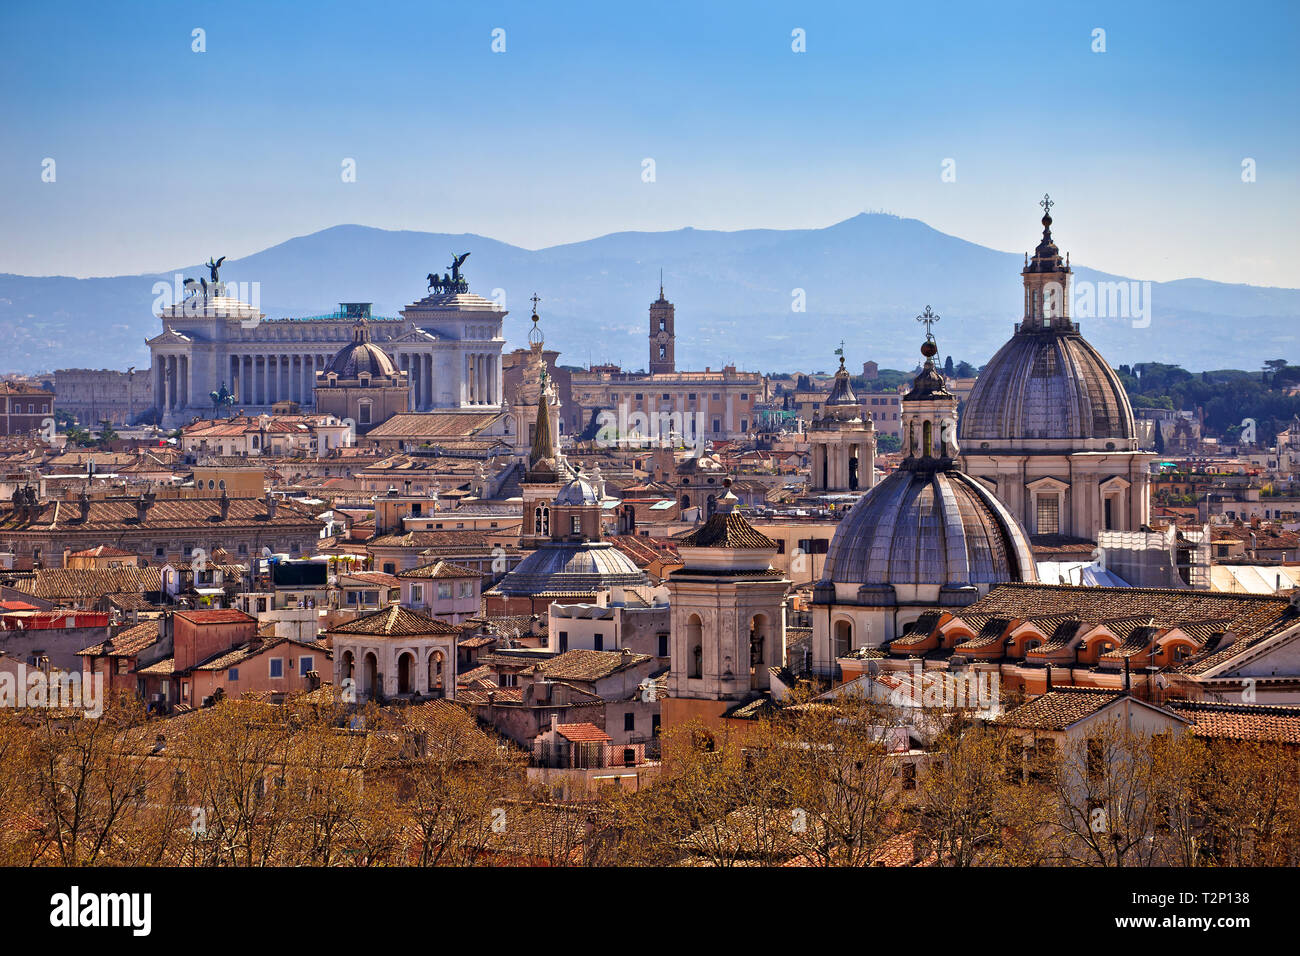 Eternal city of Rome landmarks an rooftops skyline view, capital of Italy Stock Photo